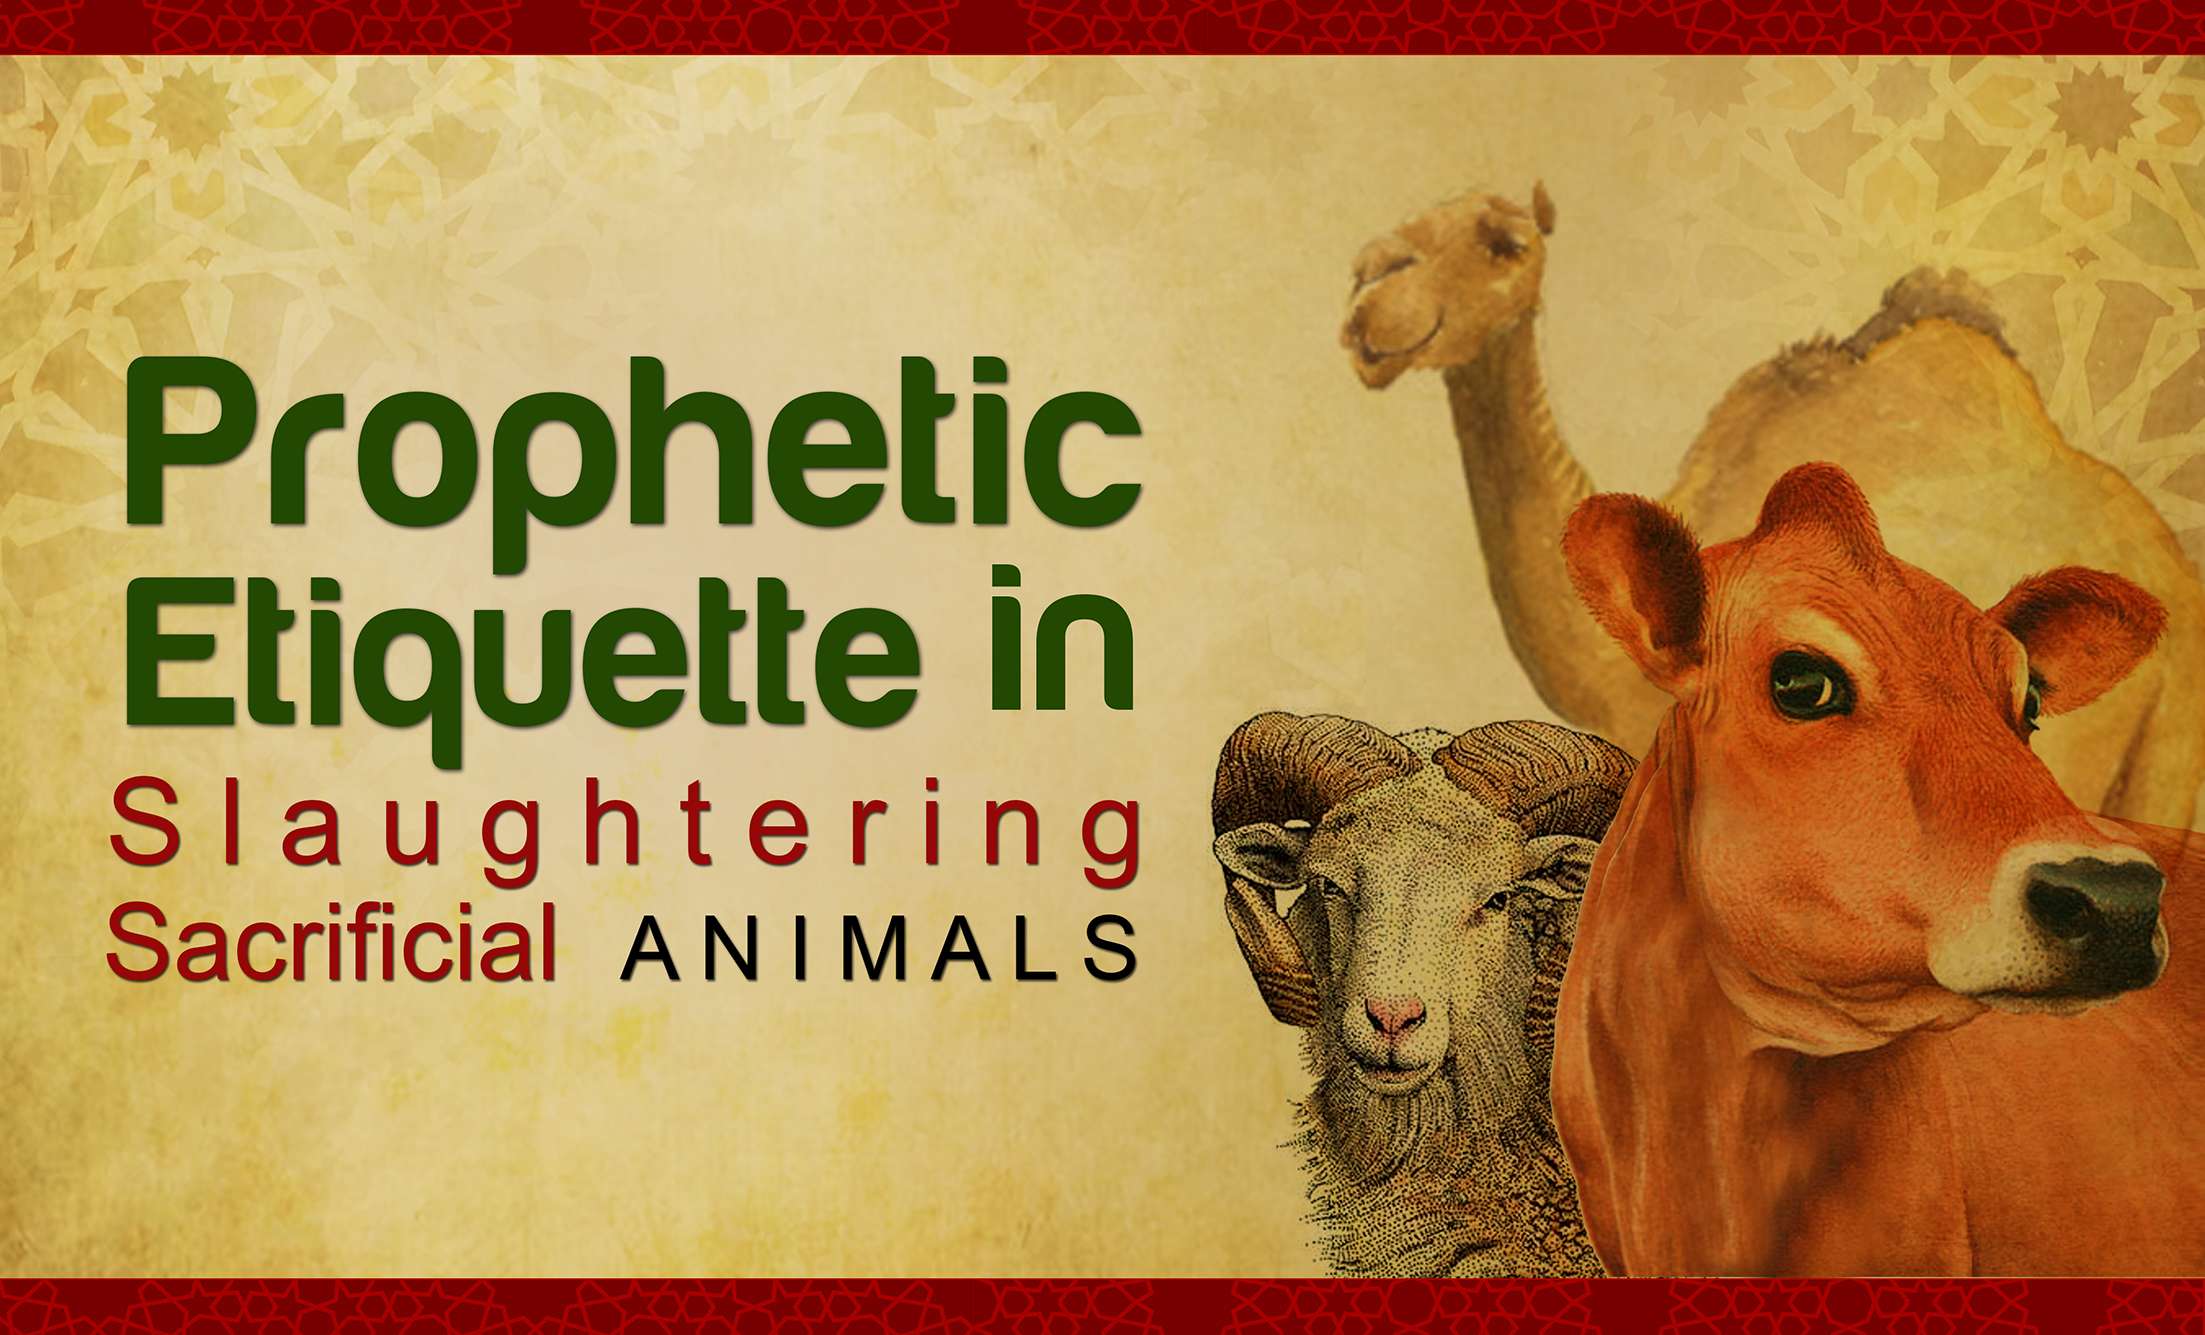 The Prophetic Etiquette of Slaughtering